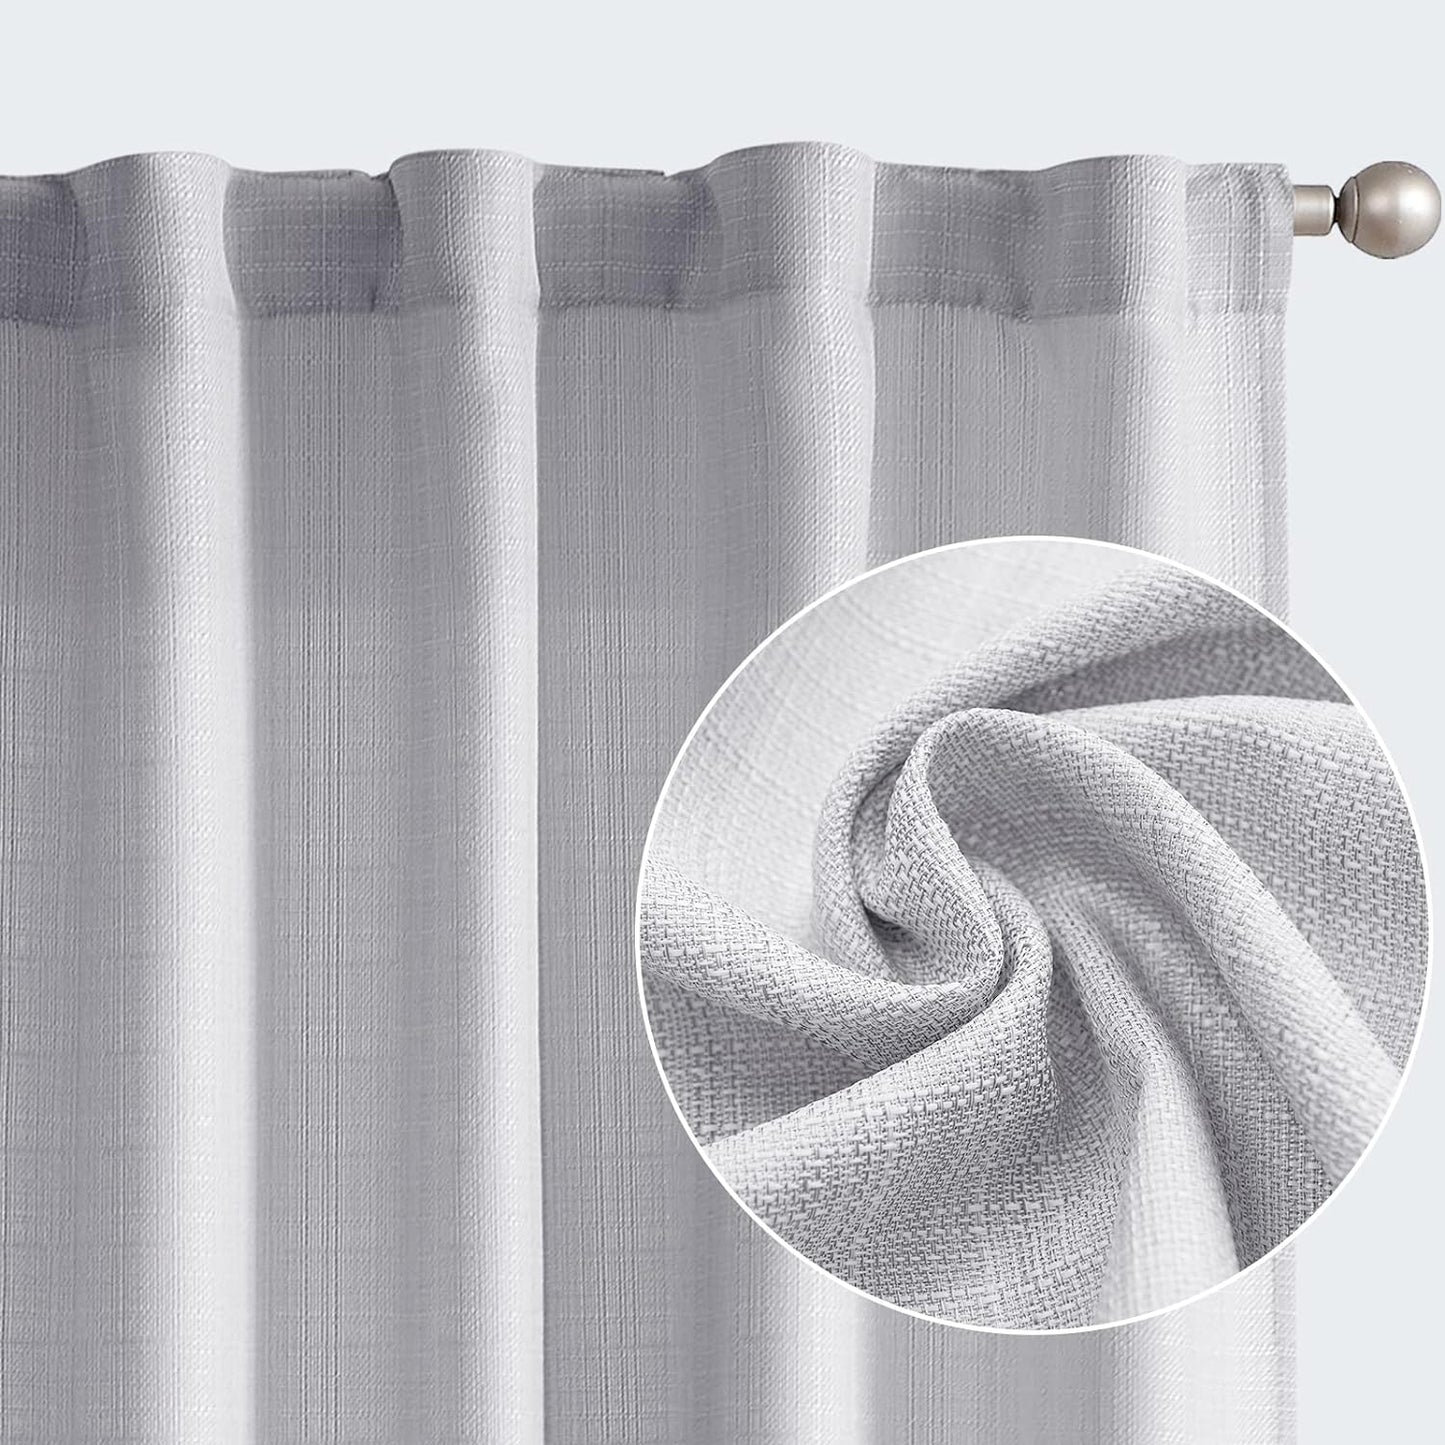 COLLACT White Linen Textured Curtains 84 Inch Length 2 Panels for Living Room Casual Weave Light Filtering Semi Sheer Curtains & Drapes for Bedroom Grommet Top Window Treatments, W38 X L84, White  COLLACT Rod Pocket | Heathered Grey W38 X L96 